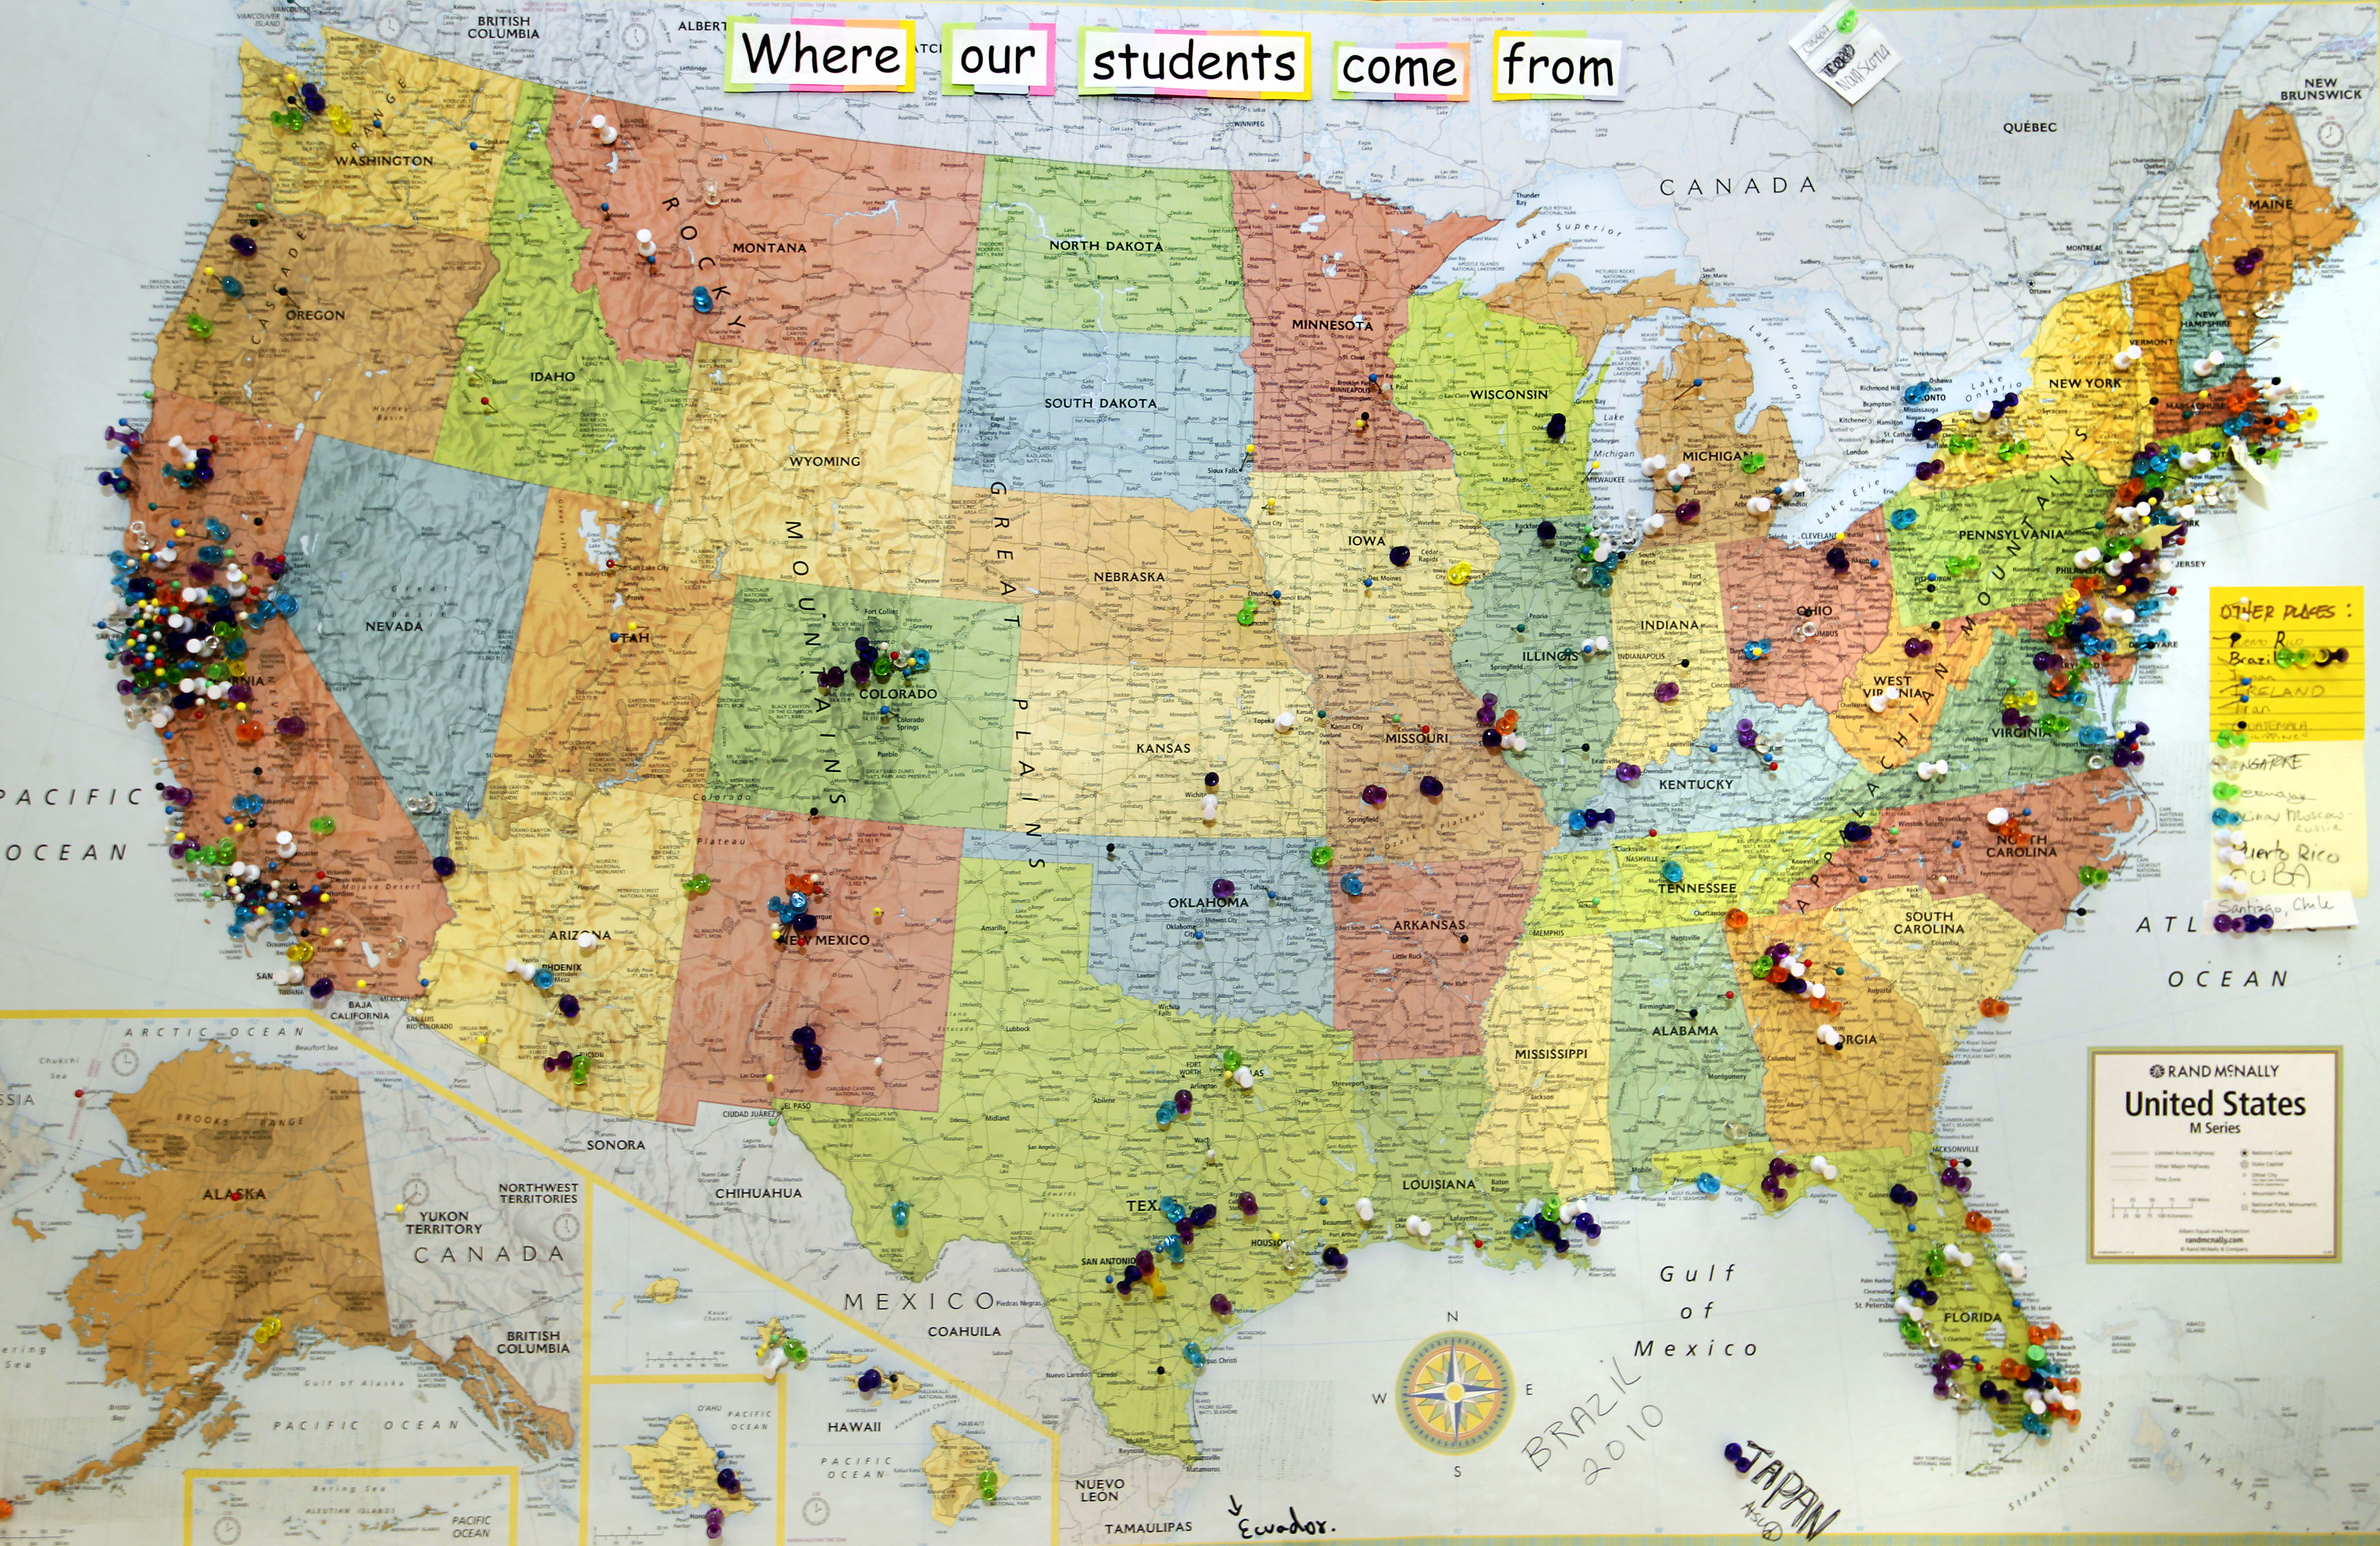 Pins in a United States map show where students have come from to take classes at Oaksterdam University, the nation's first marijuana trade school, on Sept. 23, 2010 in Oakland.